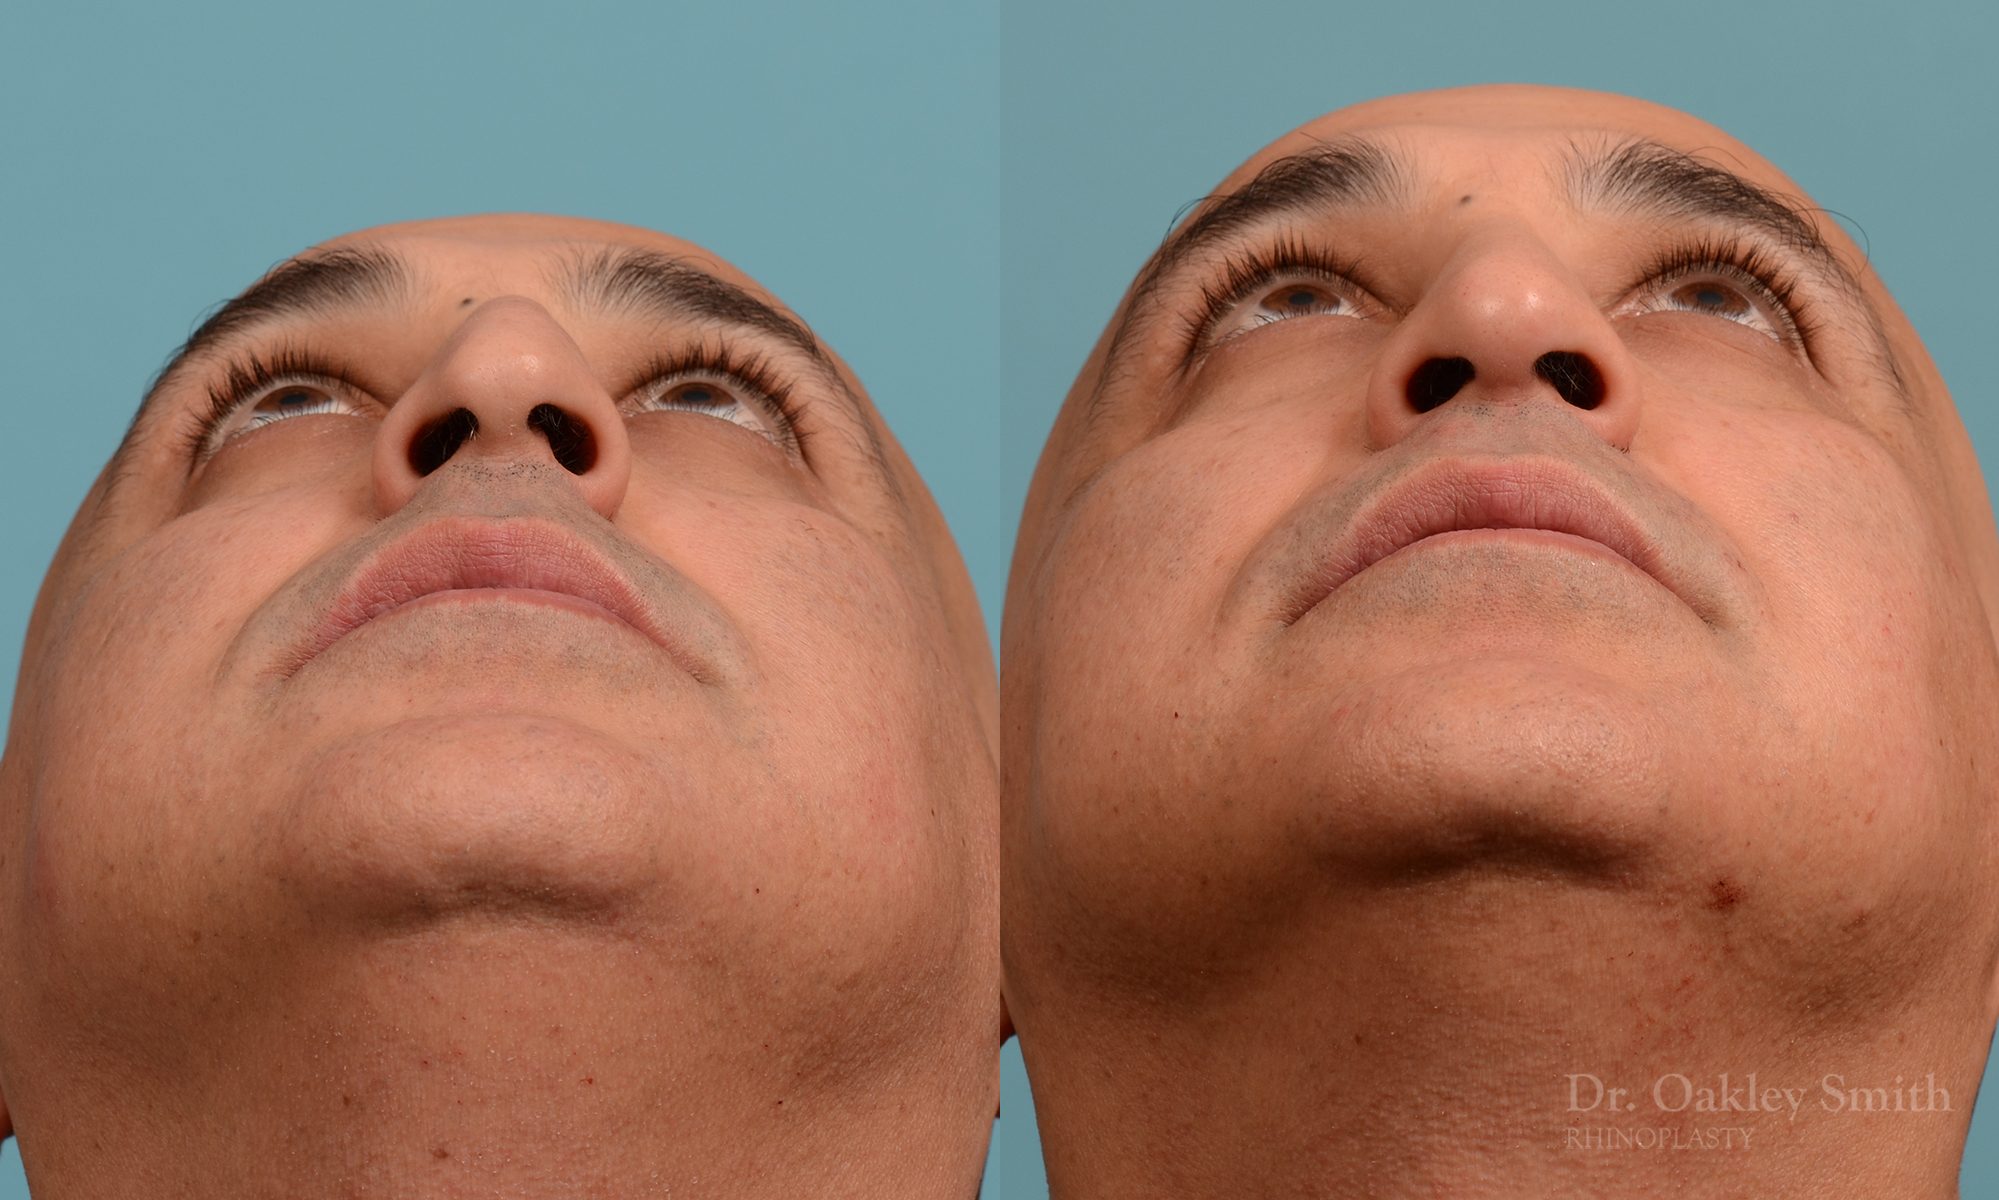 As one of a hand full of surgeons in North America who limits his practice to only Rhinoplasty surgery, it is obvious that he has mastered his art. There is no question why he is one of the busiest cosmetic nose job surgeons in the country.